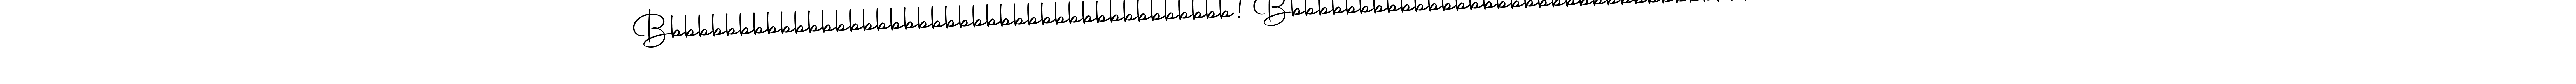 Make a beautiful signature design for name Bbbbbbbbbbbbbbbbbbbbbbbbbbbbbbbbbbbbbbbbbb! Bbbbbbbbbbbbbbbbbbbbbbbbbbbbbbbbbbbbbbbbbbbbbbbb. With this signature (Autography-DOLnW) style, you can create a handwritten signature for free. Bbbbbbbbbbbbbbbbbbbbbbbbbbbbbbbbbbbbbbbbbb! Bbbbbbbbbbbbbbbbbbbbbbbbbbbbbbbbbbbbbbbbbbbbbbbb signature style 10 images and pictures png